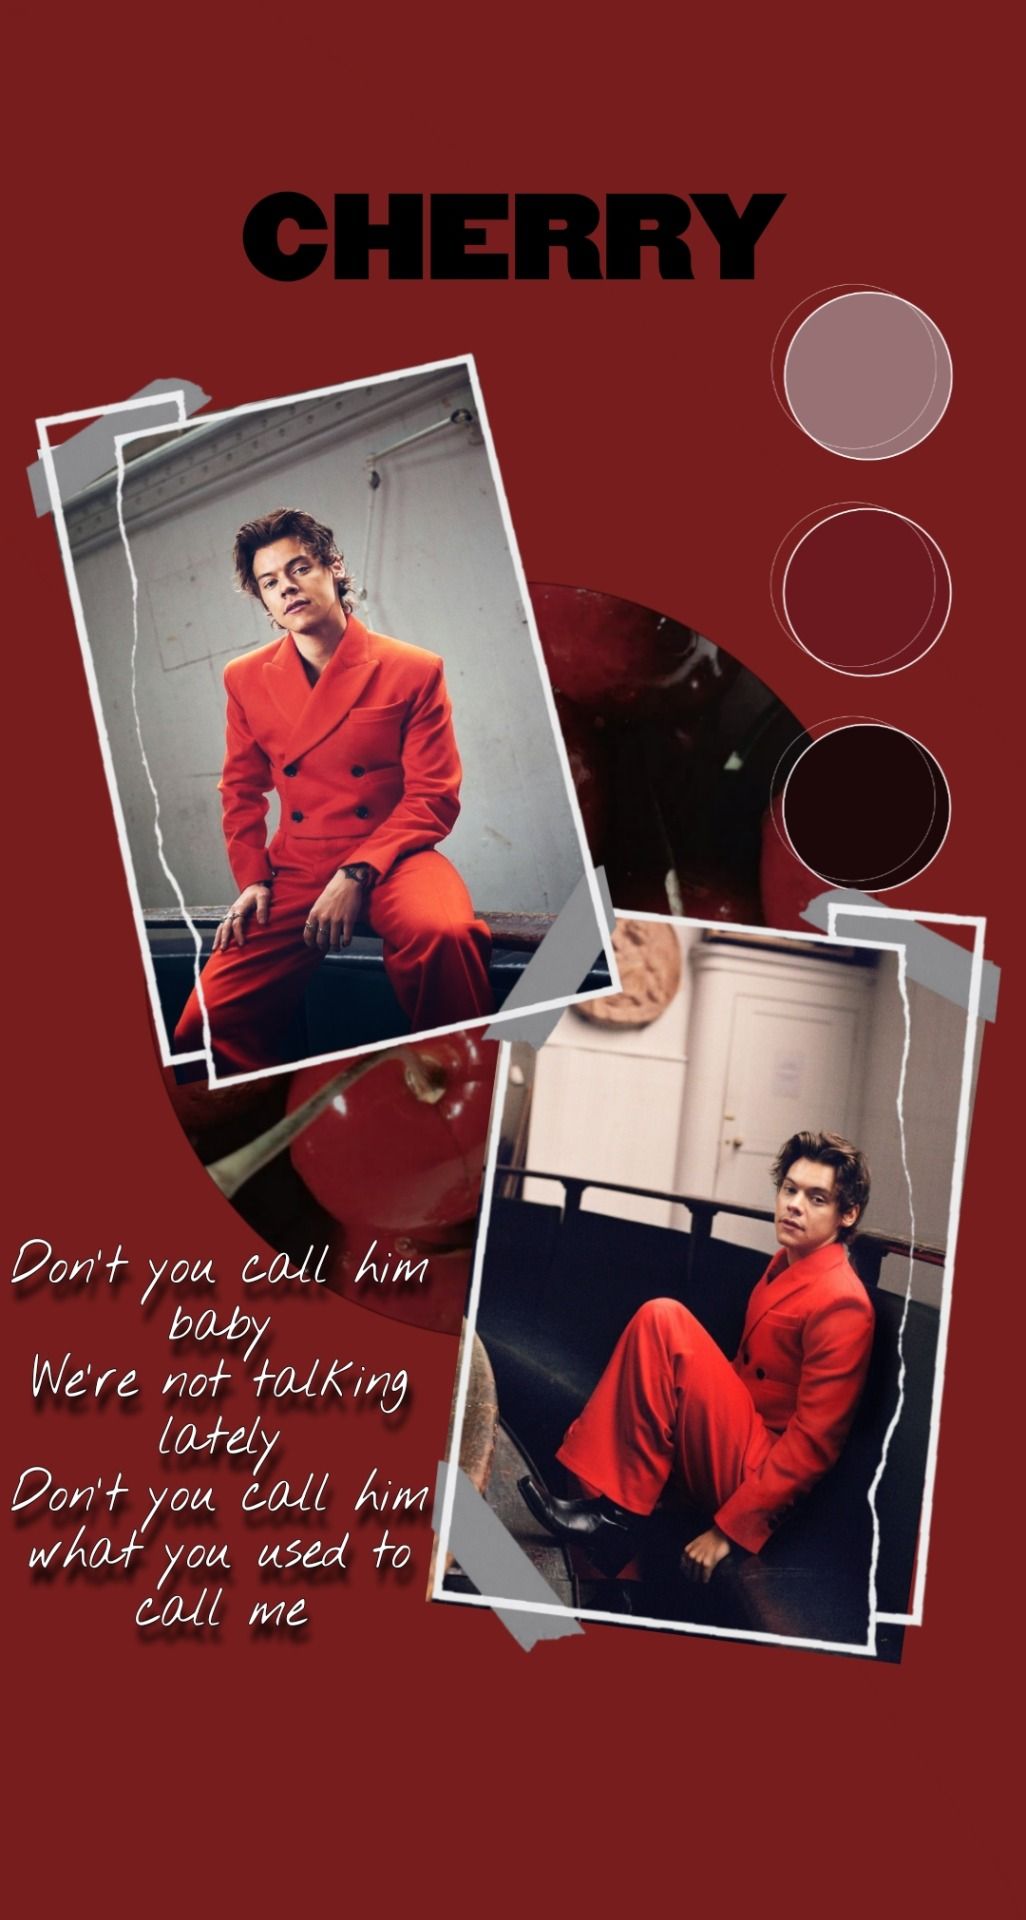 Harry Styles Cherry Wallpaper I Made For My Phone Let Me Know If You Want Me To Make More - Harry Styles